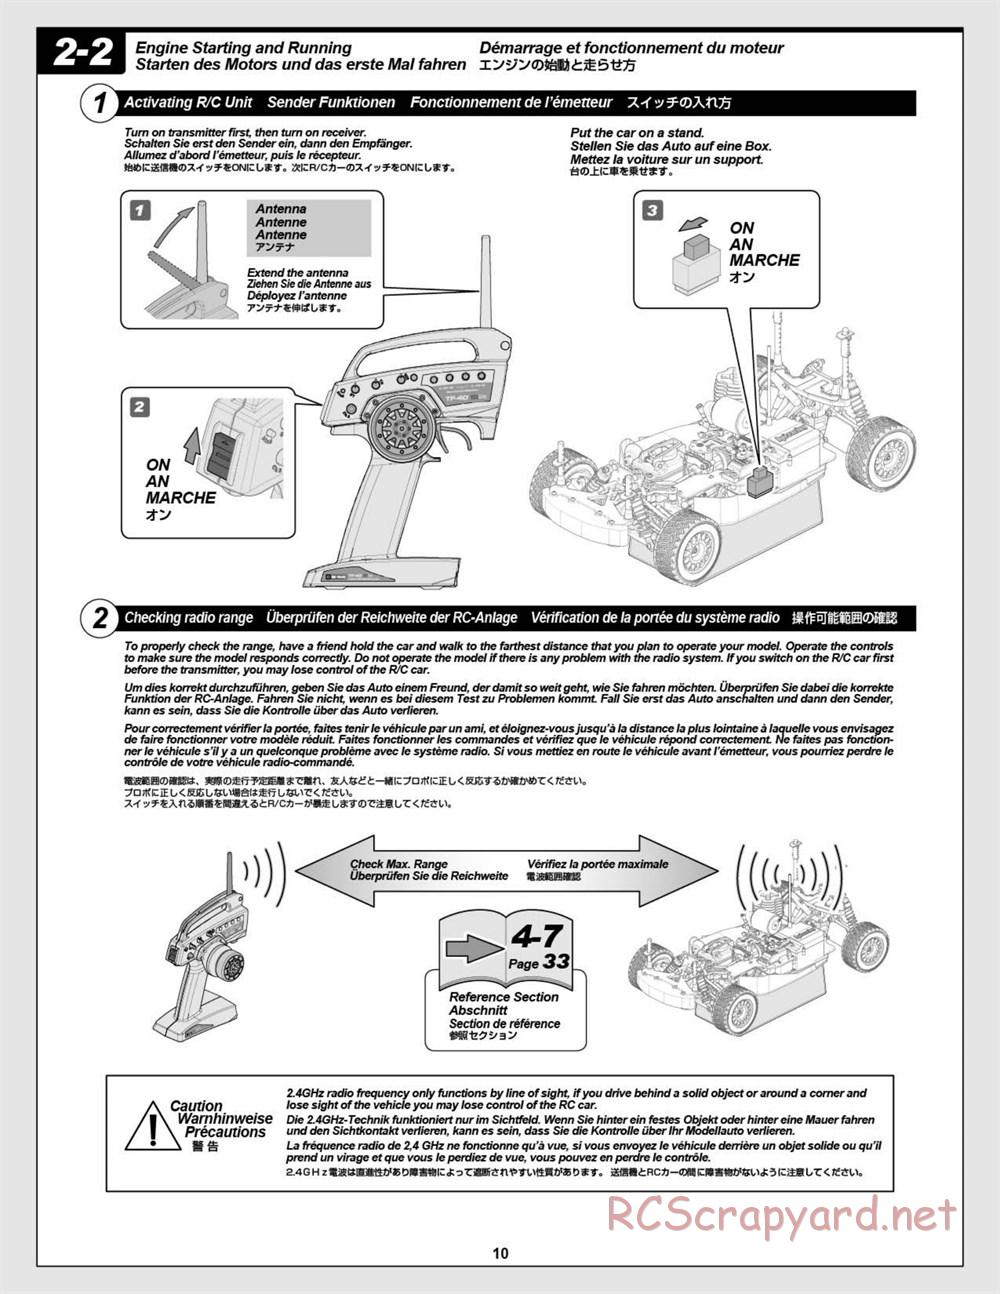 HPI - WR8 3.0 - Manual - Page 10